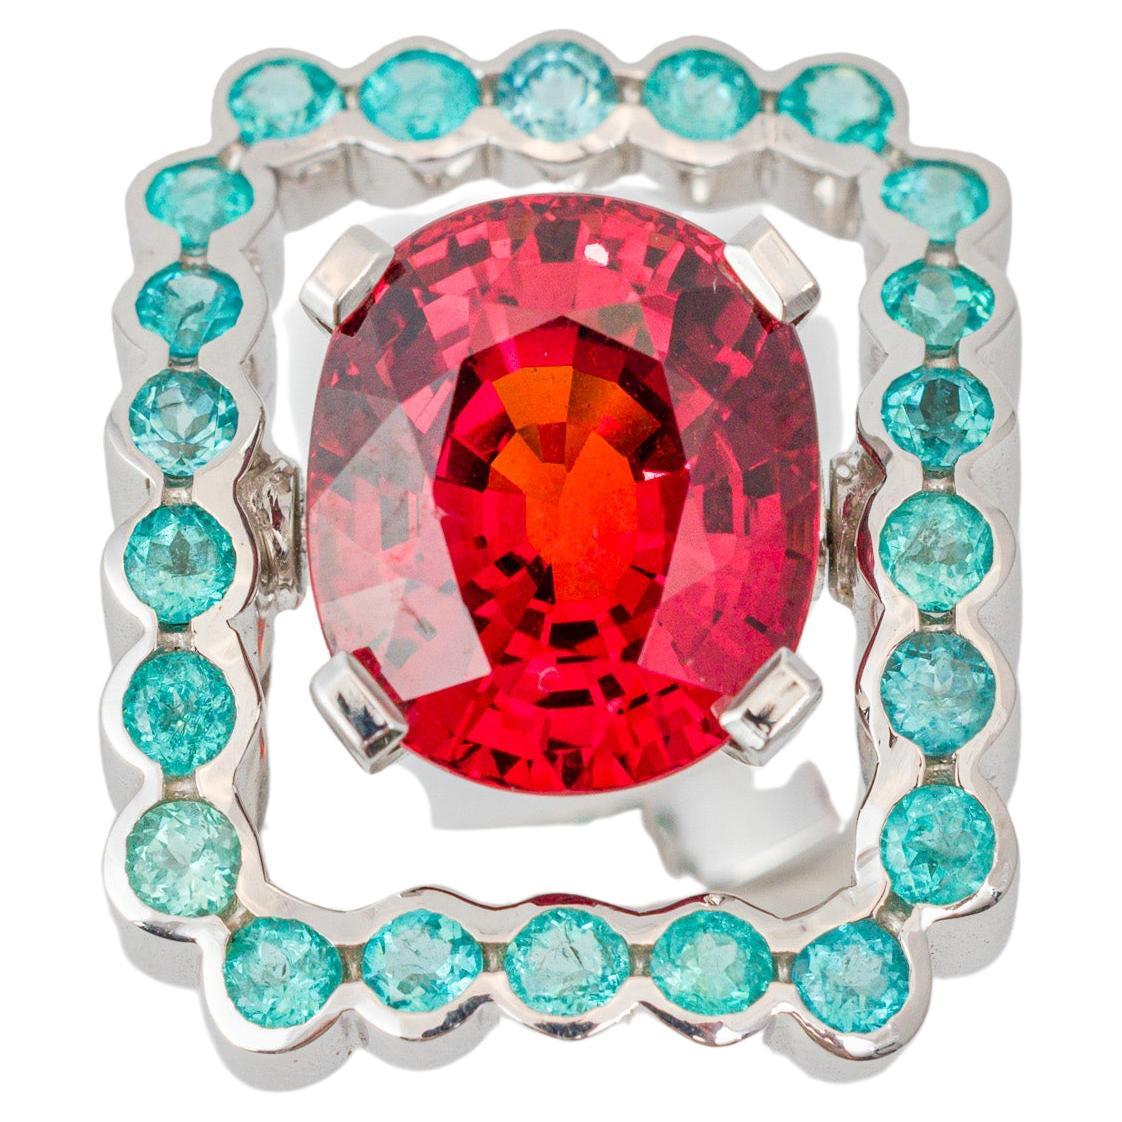 "Costis" Frame In Motion Ring with 14.53 carats Spessartite Garnet and Paraibas For Sale